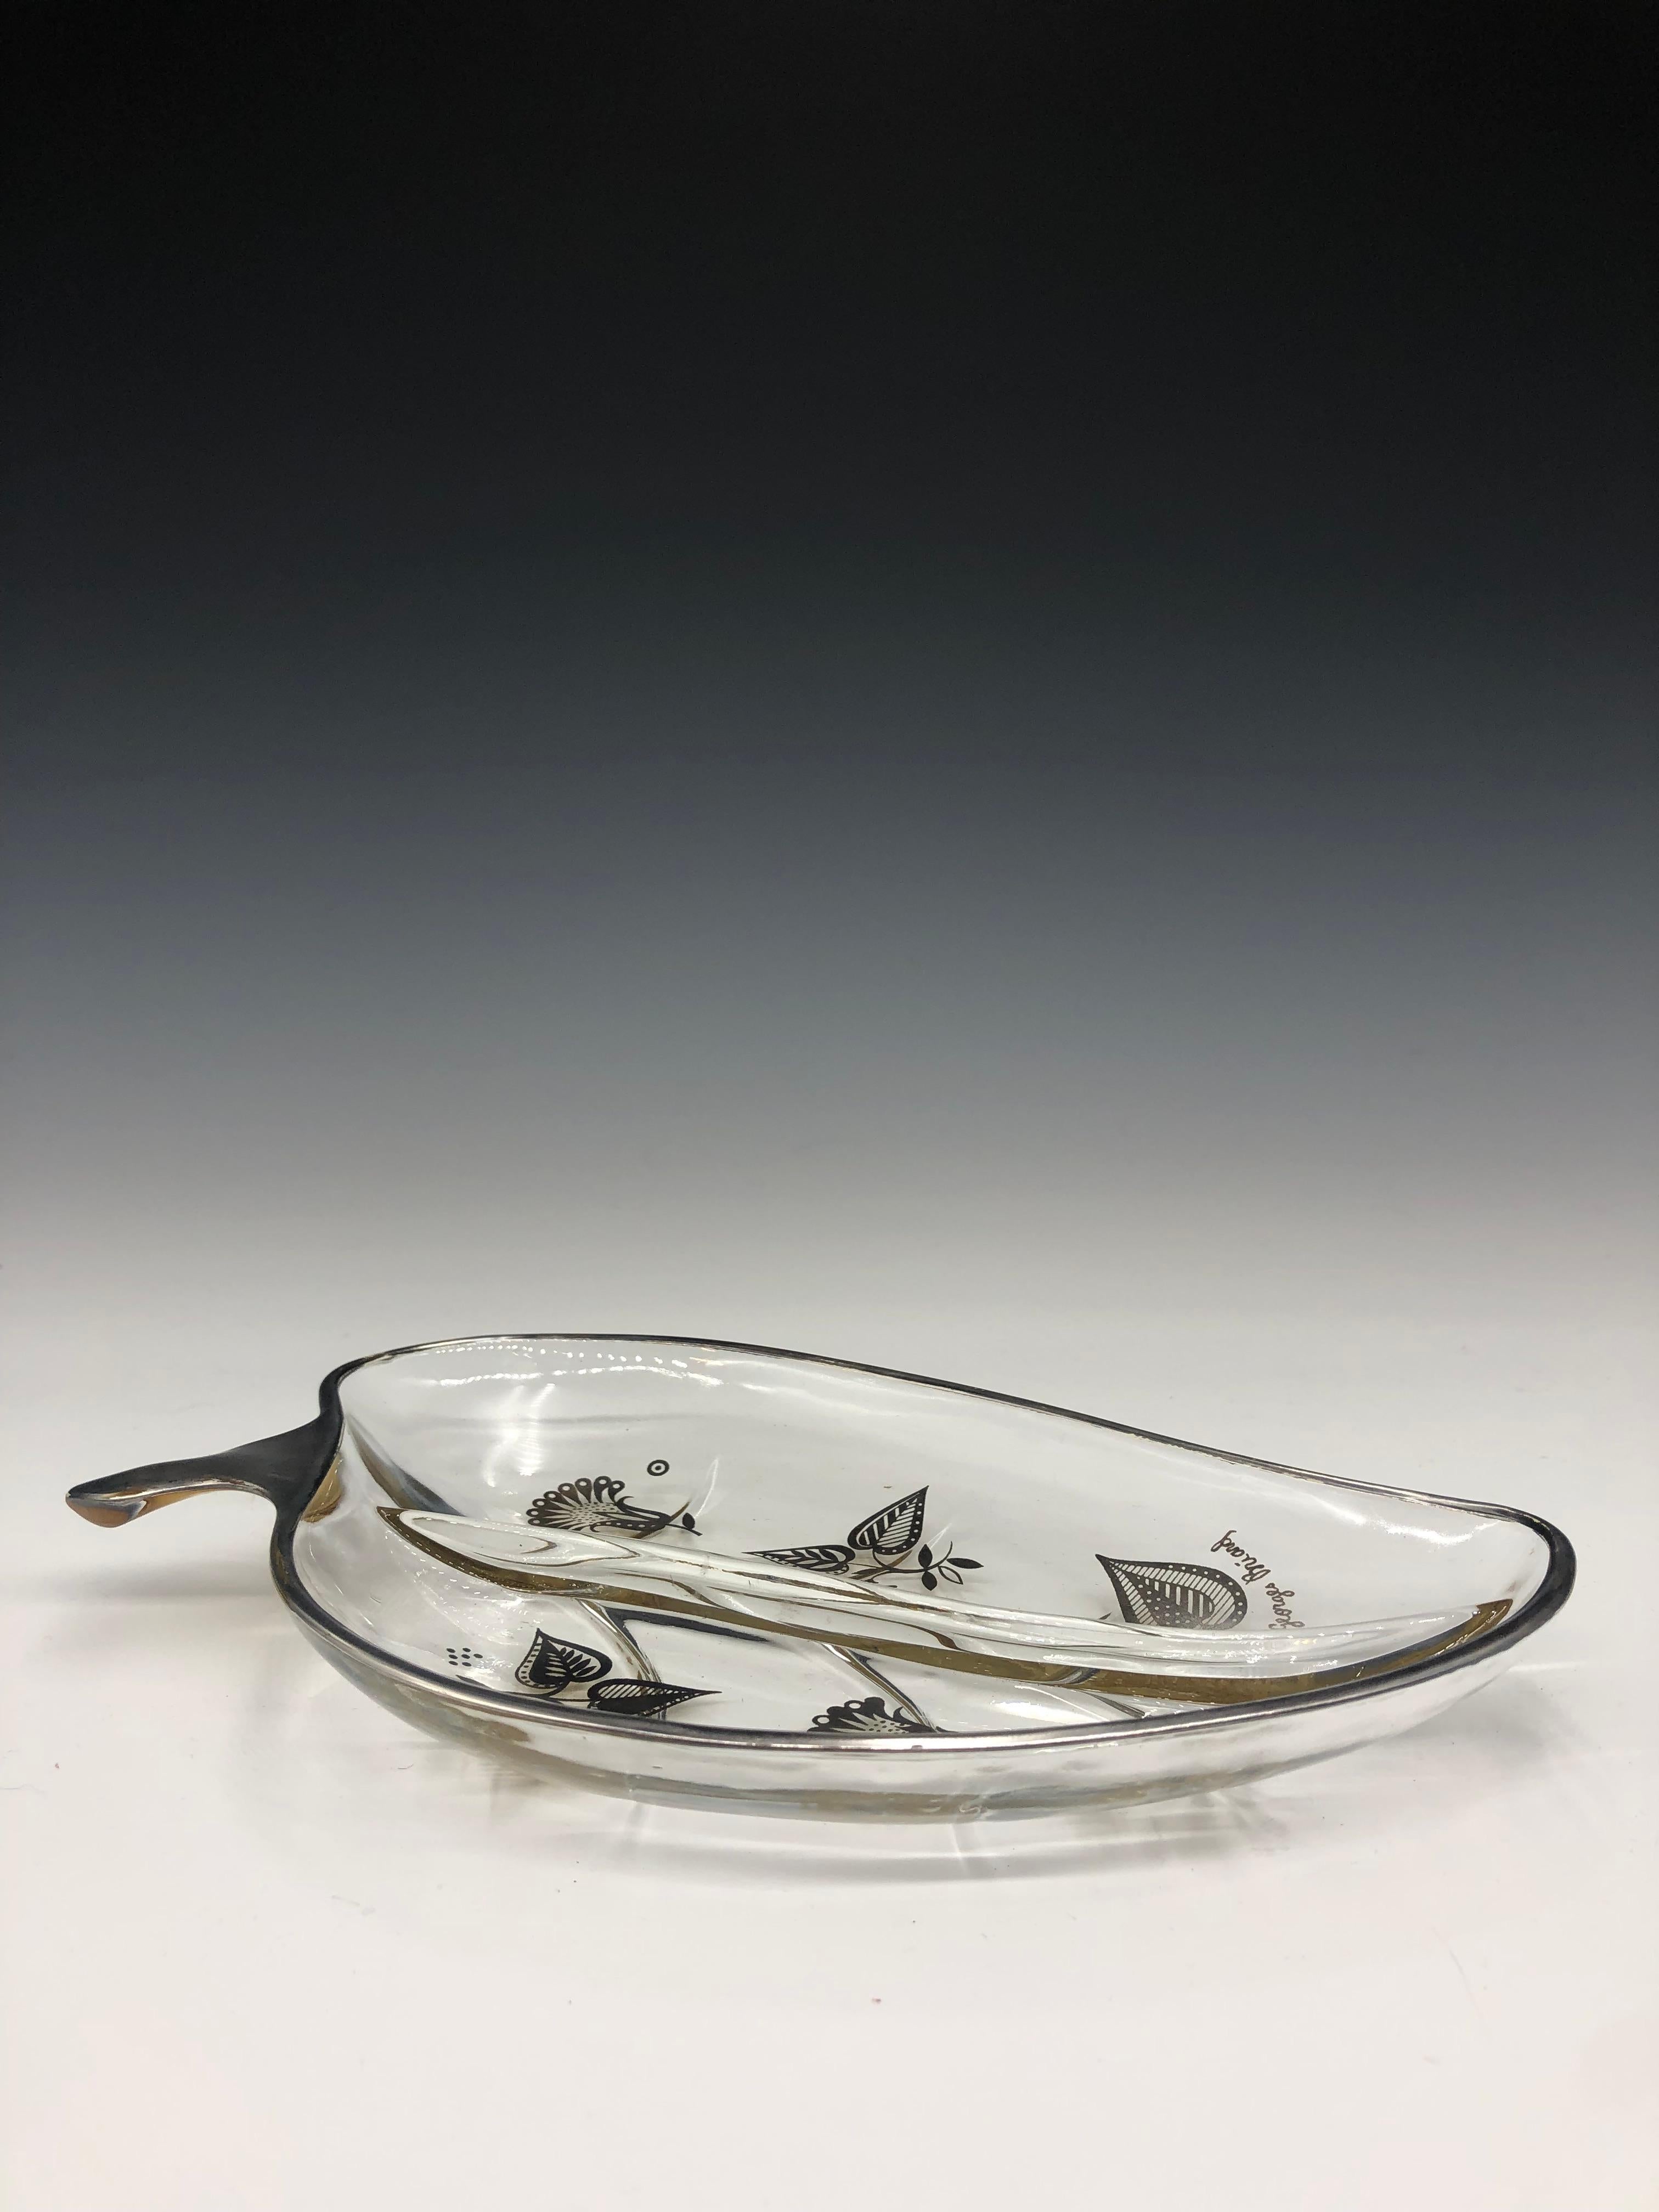 Vintage 1960s Georges Briard clear leaf shape tray/dish with silver floral detail. The piece has a divider that goes down the center. Signed lower right. It can be used as a candy, nut, relish dish, or a catch-all. 

Georges Briard was an American